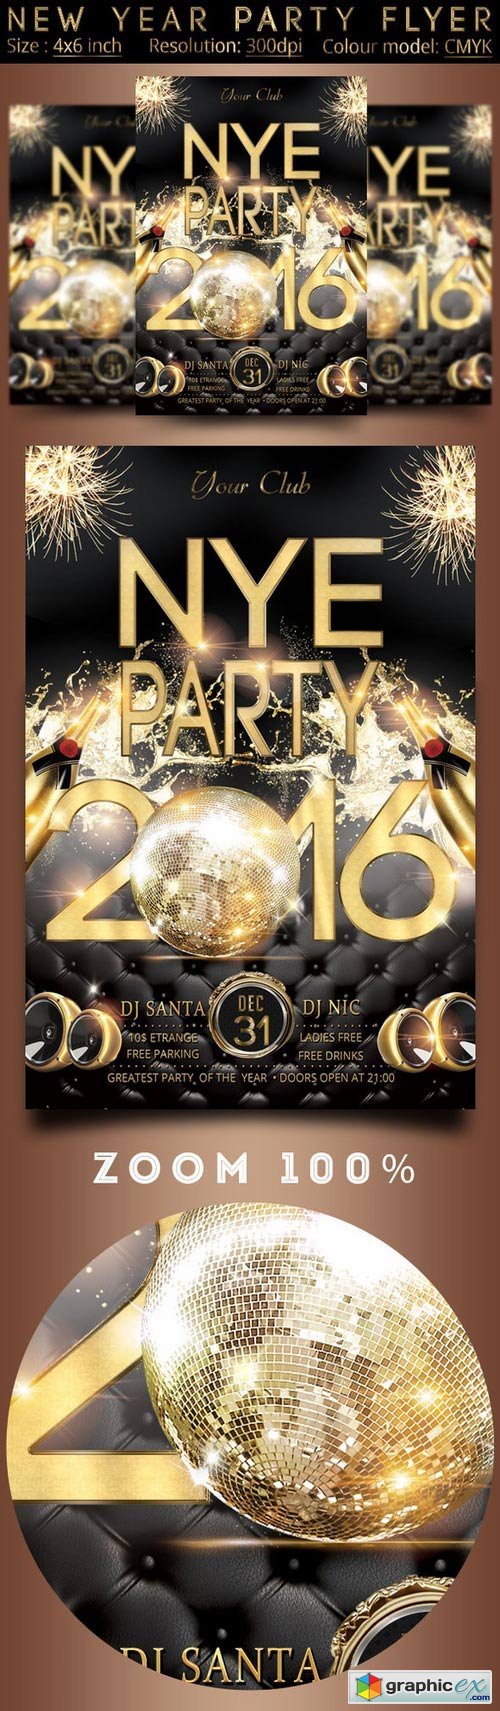 New Year Party Flyer 362874